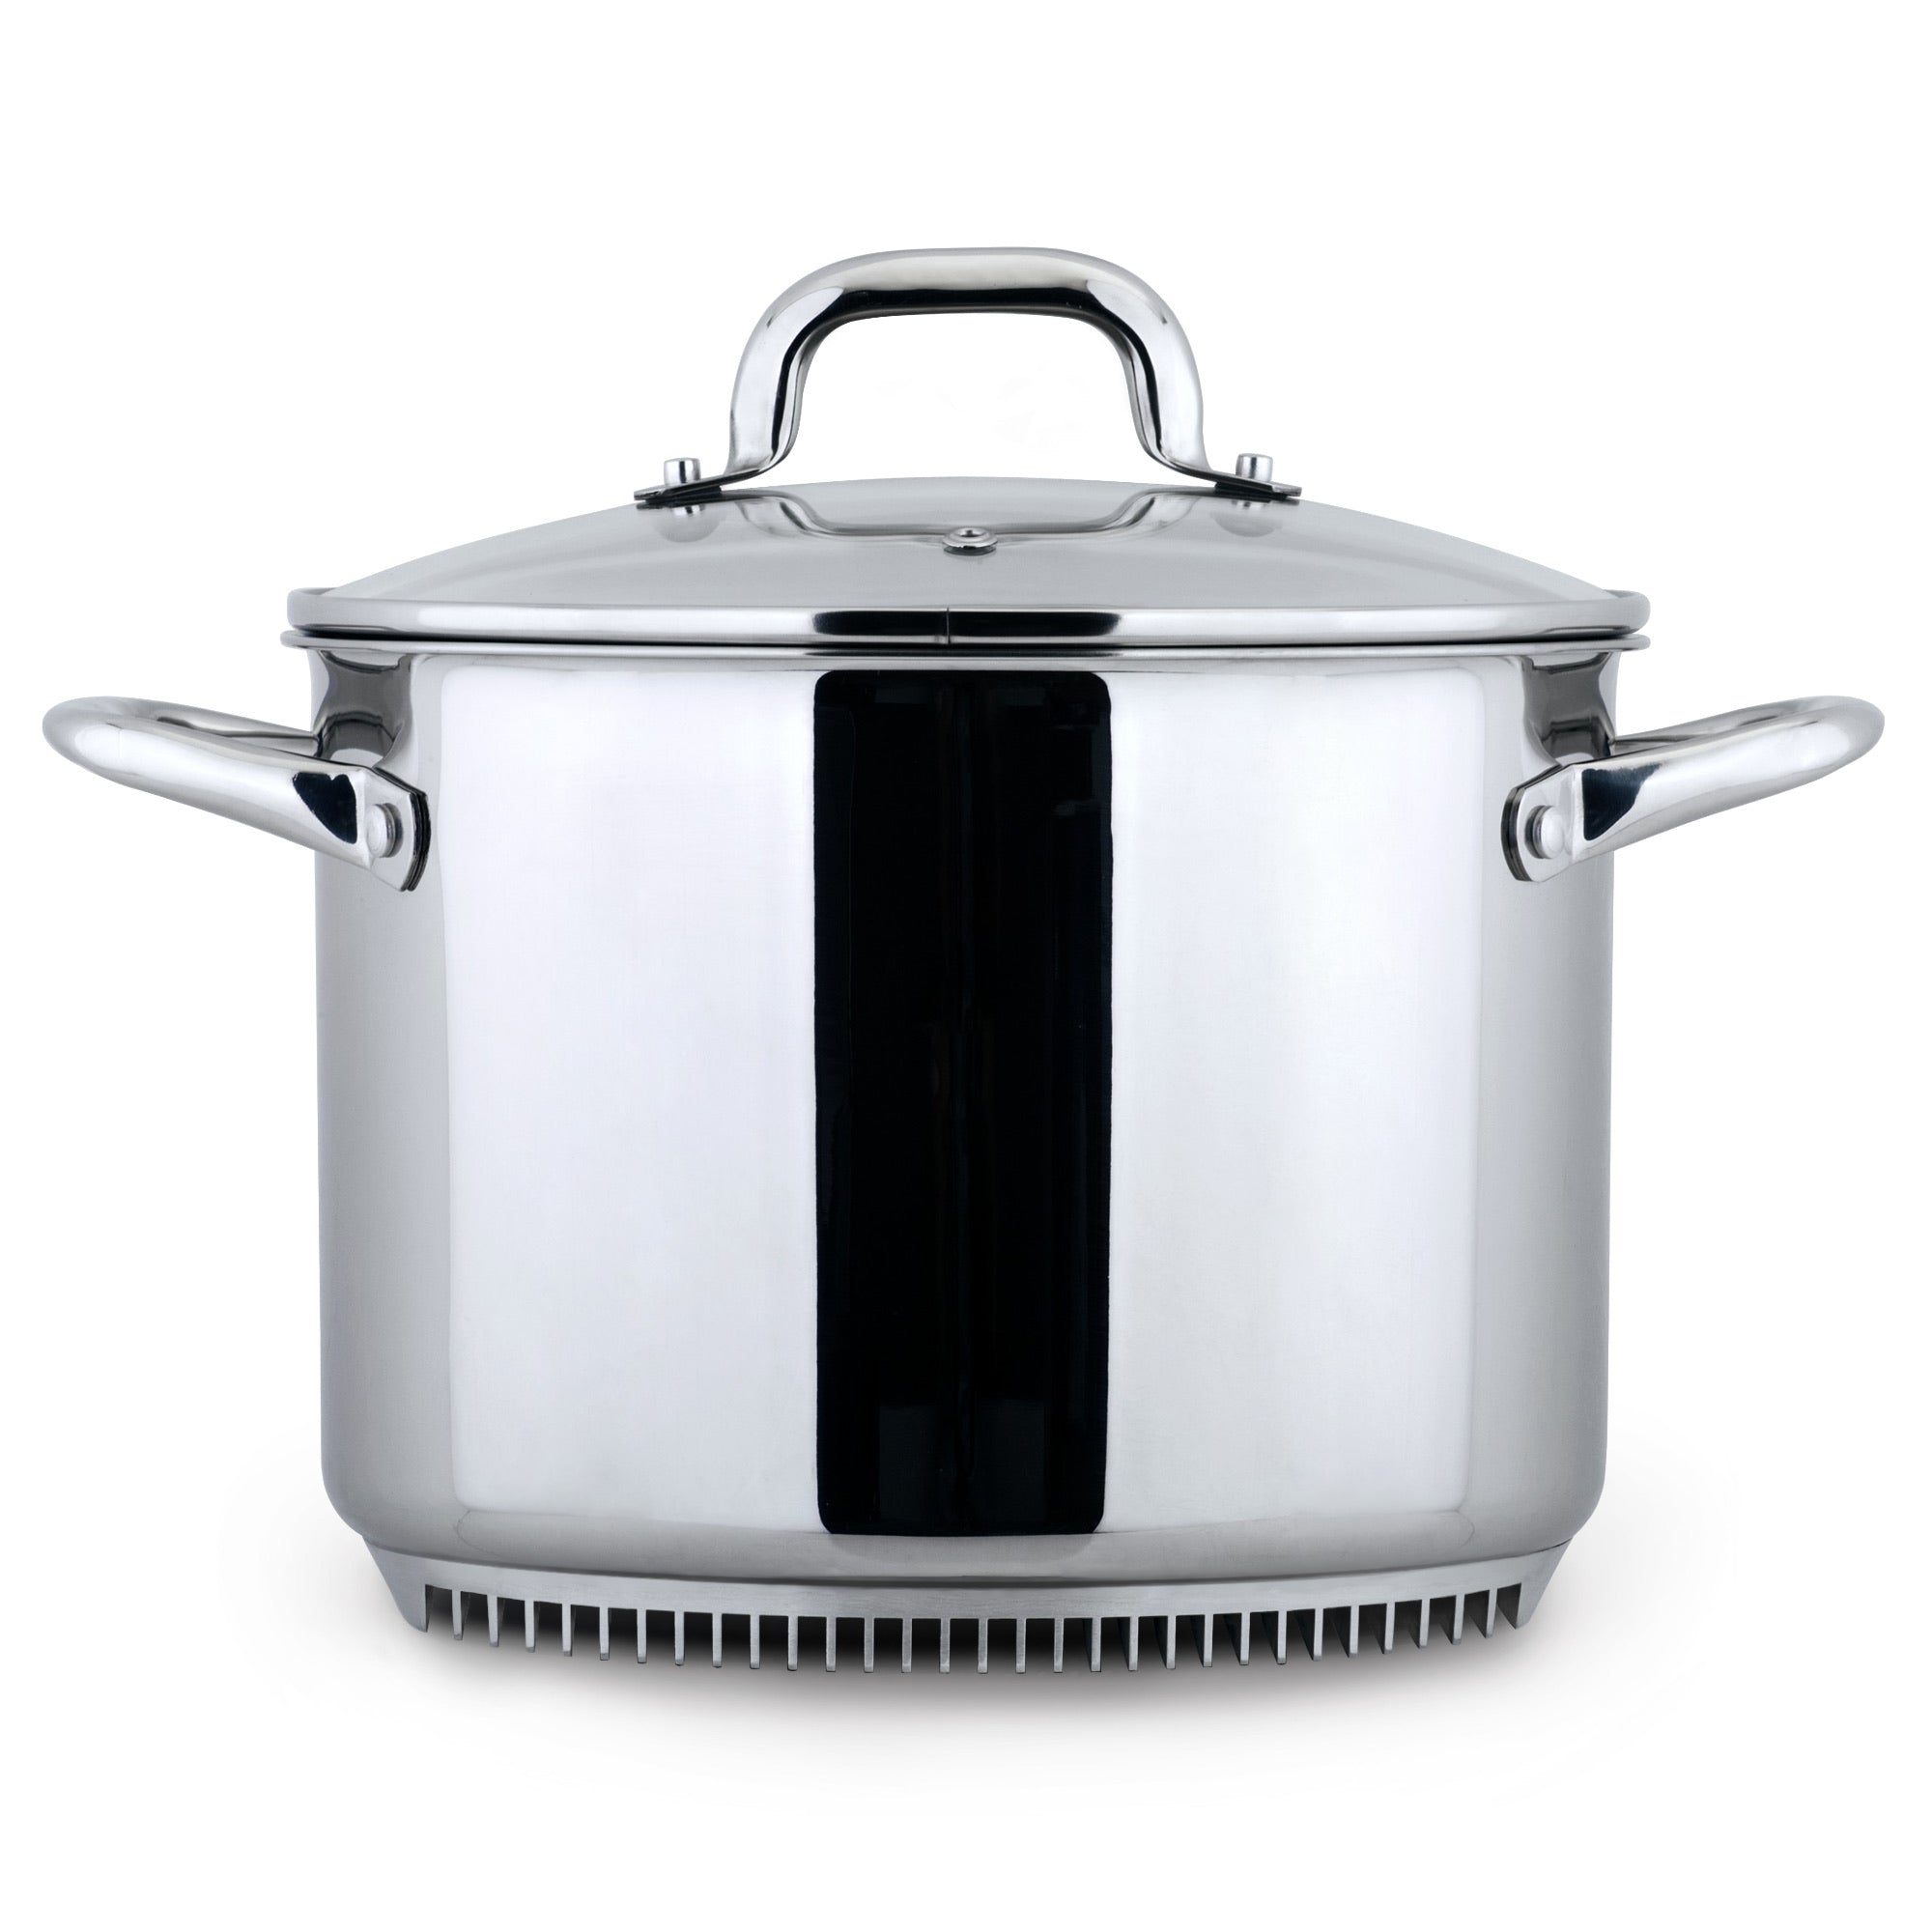 Made In Cookware - 8 Quart Stainless Steel Stock Pot With Lid 